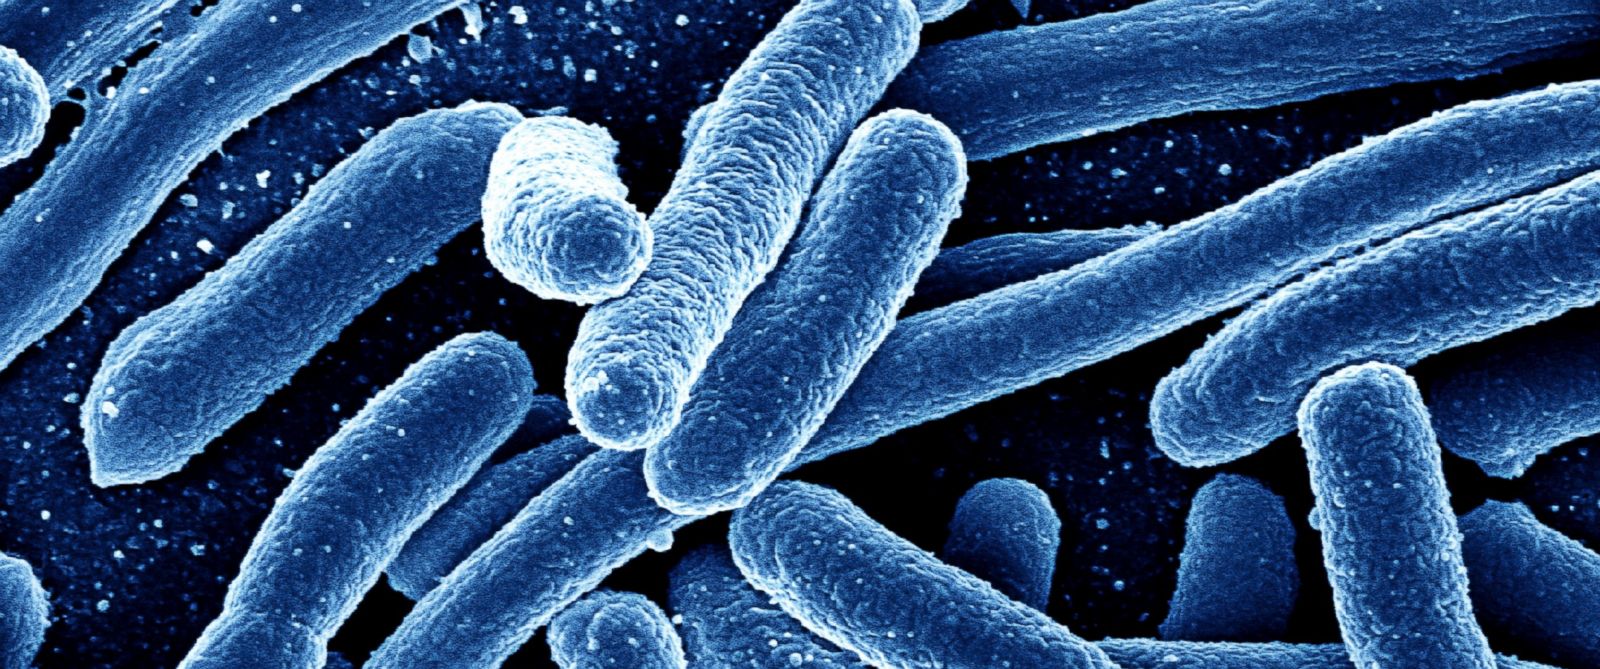 Deadly new strain of antibiotic-resistant yeast infection set to invade U.S.